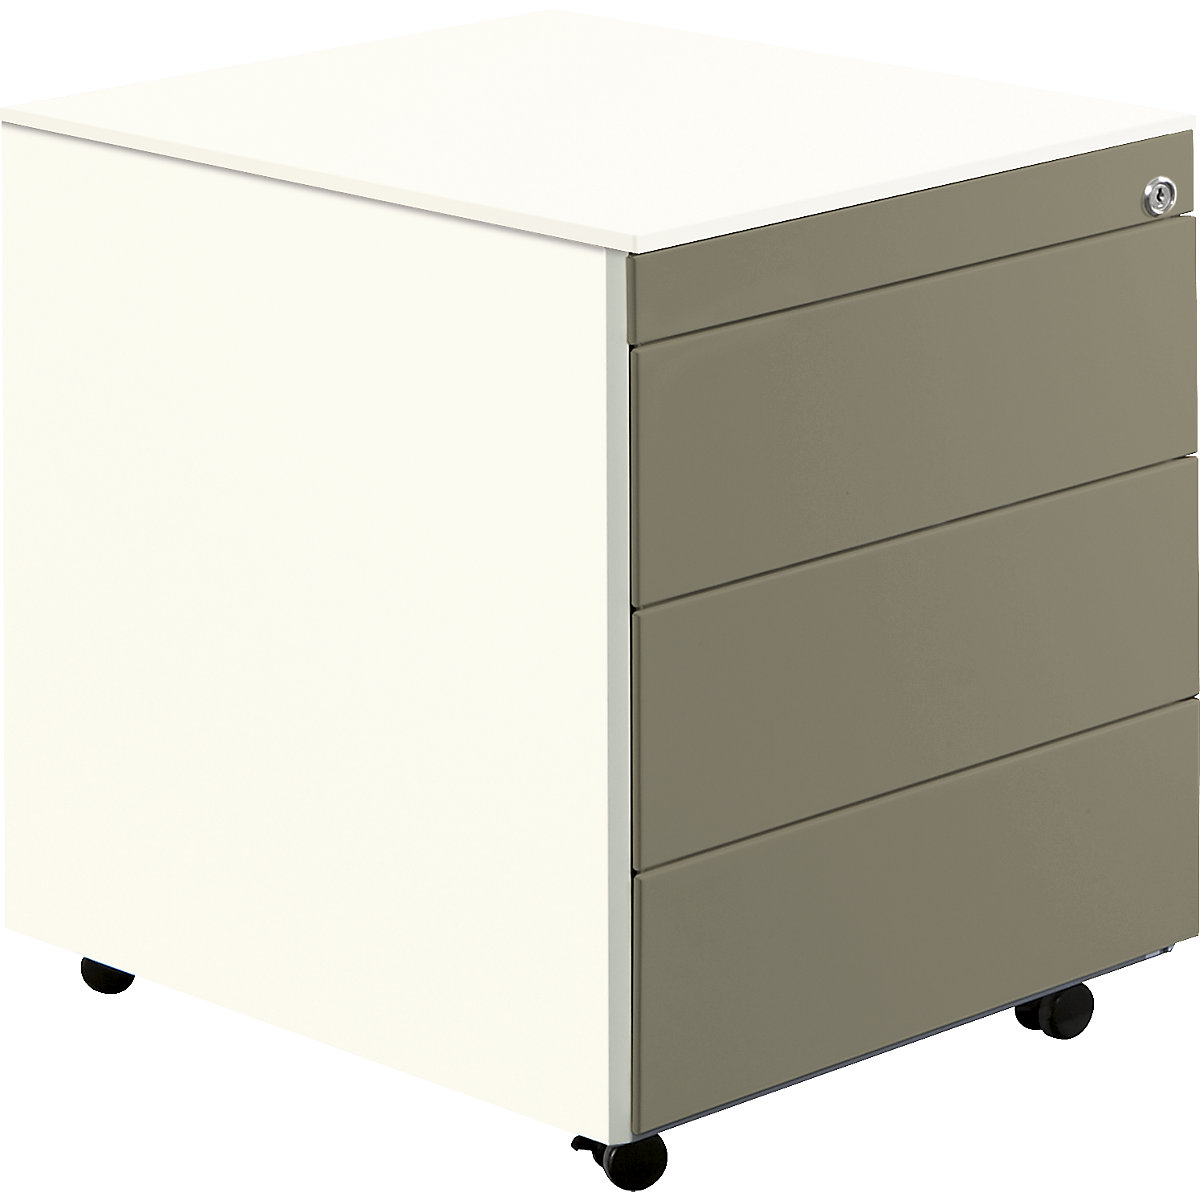 Drawer pedestal with castors – mauser, HxD 570 x 600 mm, steel top, 3 drawers, pure white / beige grey / pure white-10